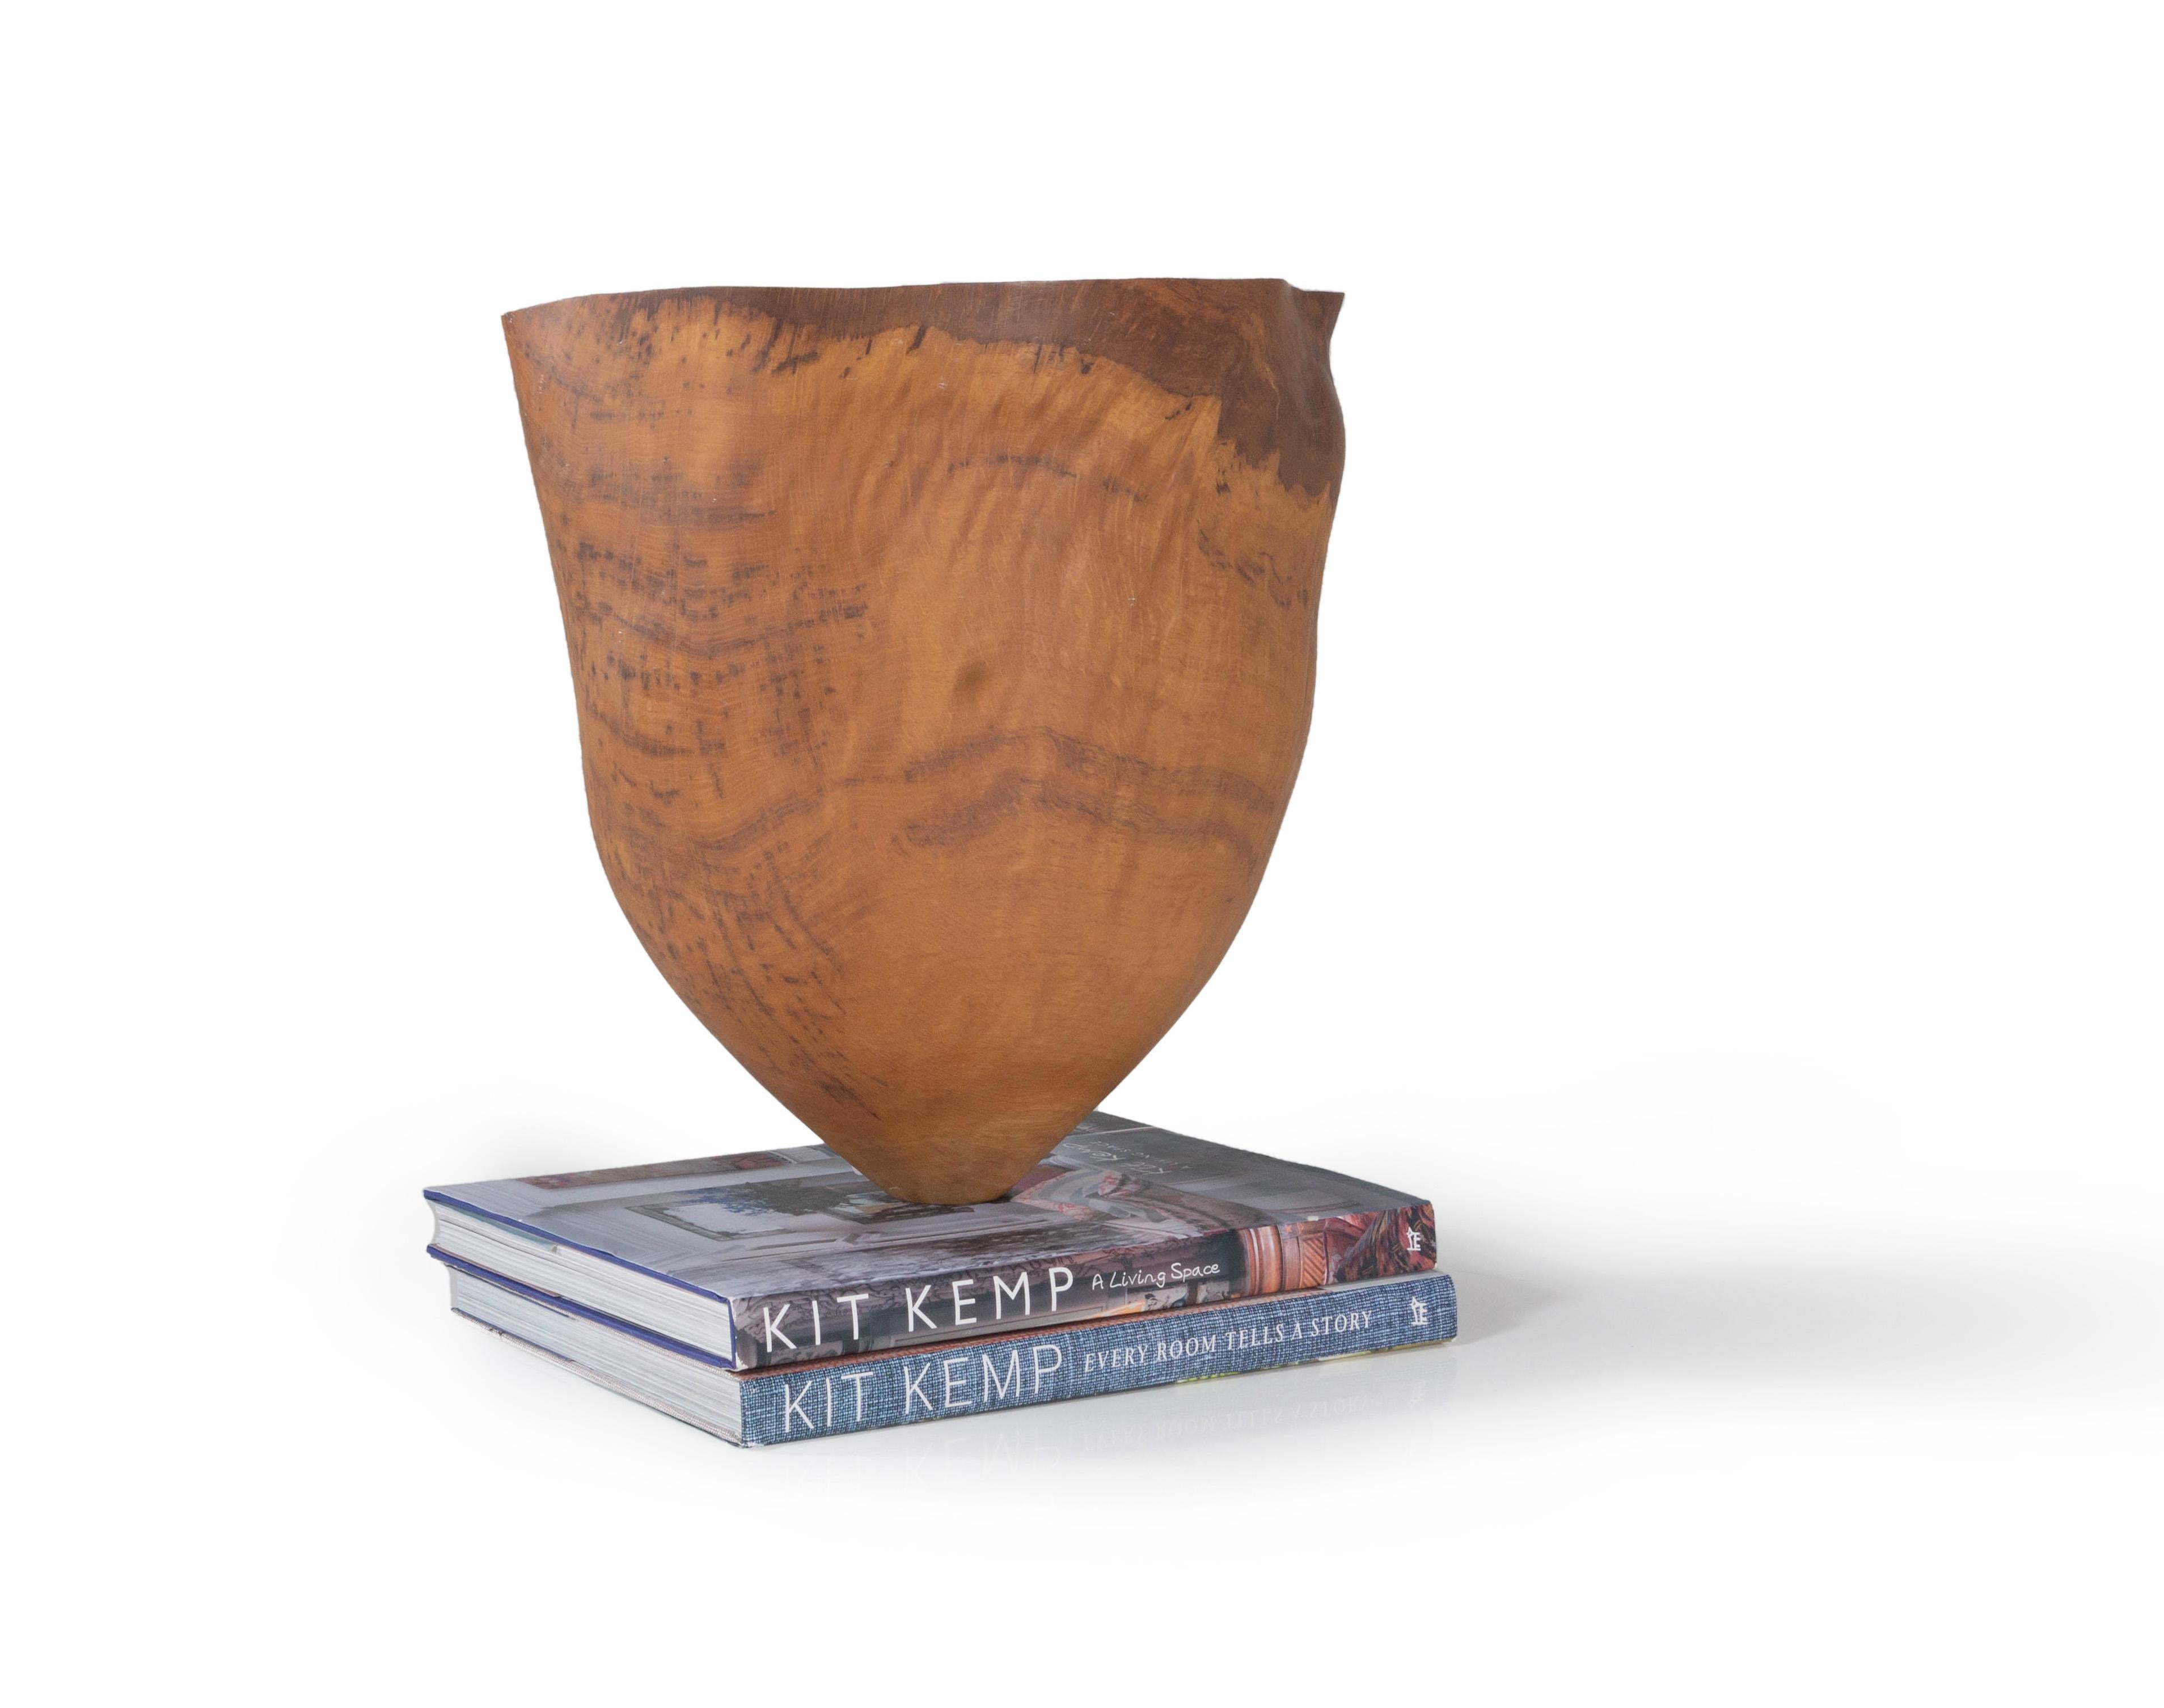 Transform your home or office into a place of calm and tranquility with this burr oak Wood Vessel by Anthony Bryant. This organically shaped bowl’s narrow base and wide opening are accentuated by its turned wood construction, while its organic shape